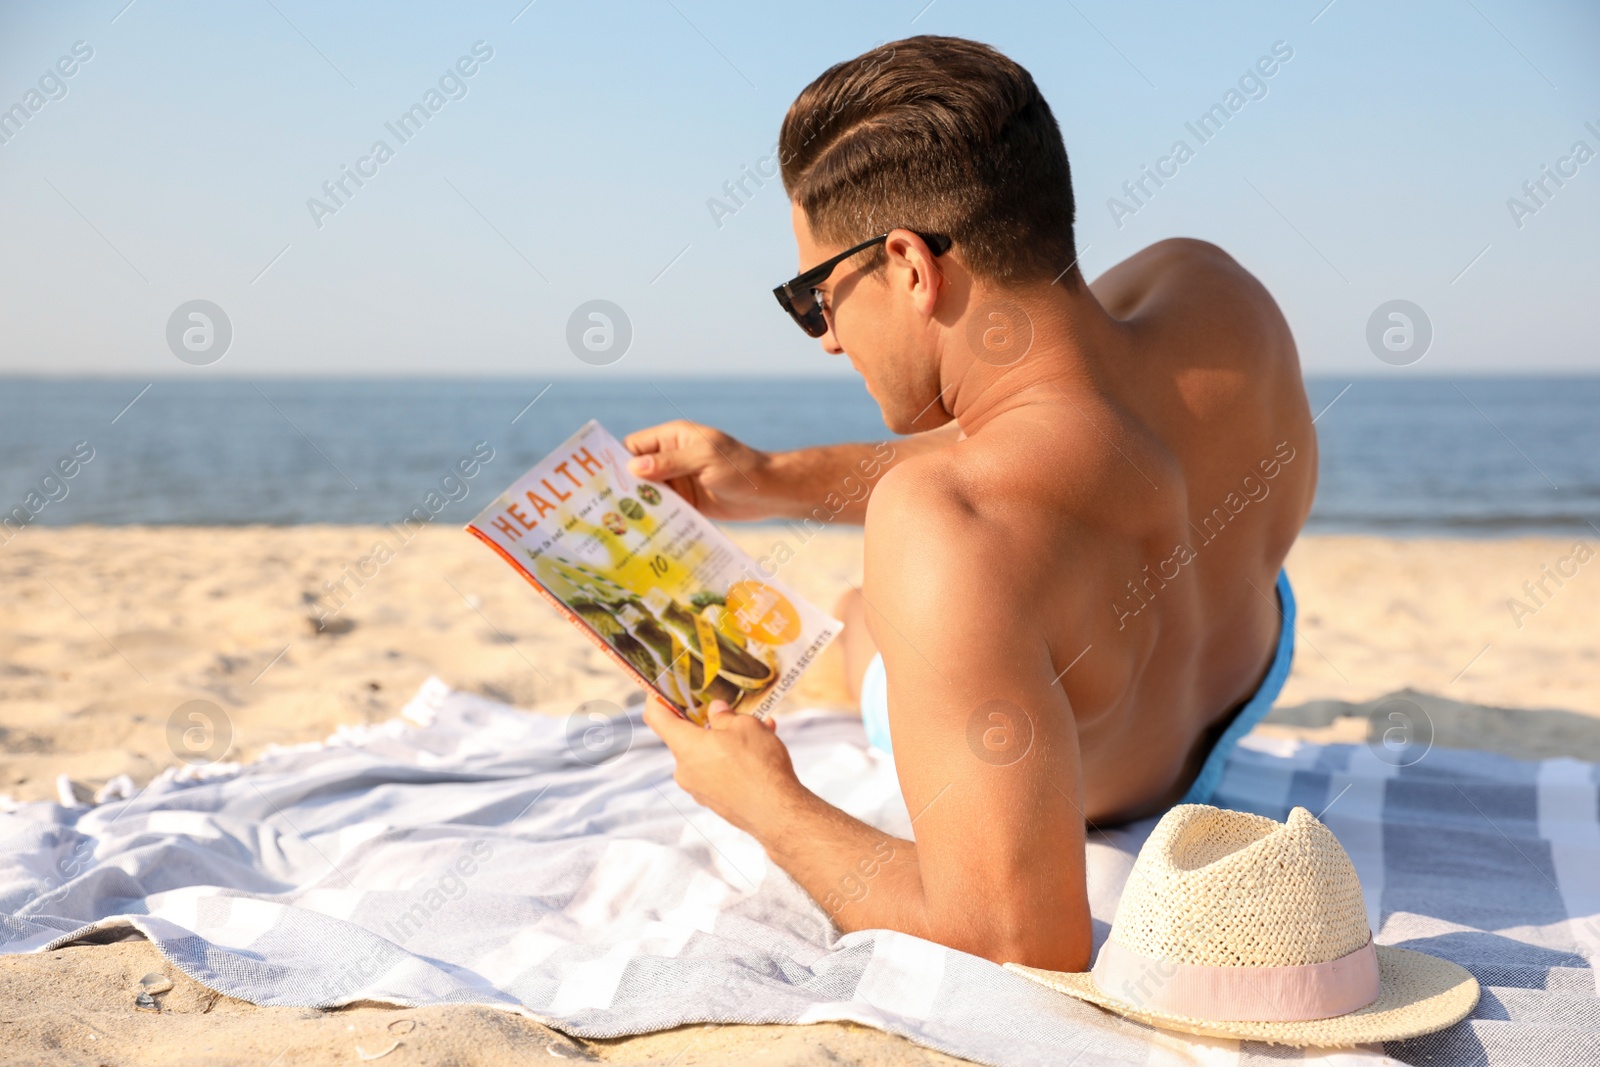 Photo of Man with slim body resting on beach